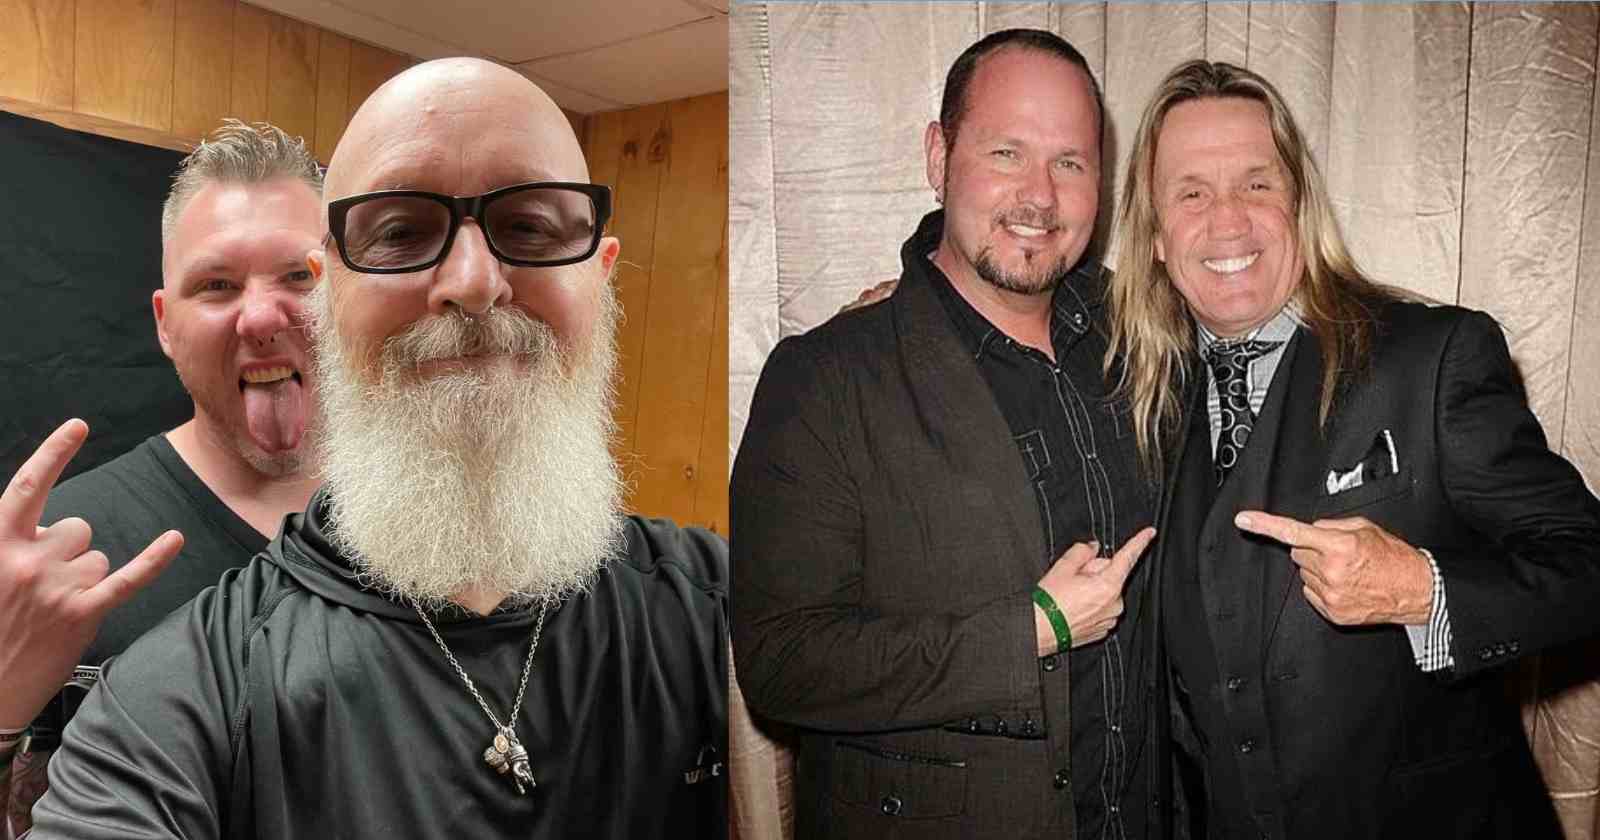 hovedpine Resonate flamme Judas Priest's Rob Halford gives his opinion on Tim "Ripper" Owens